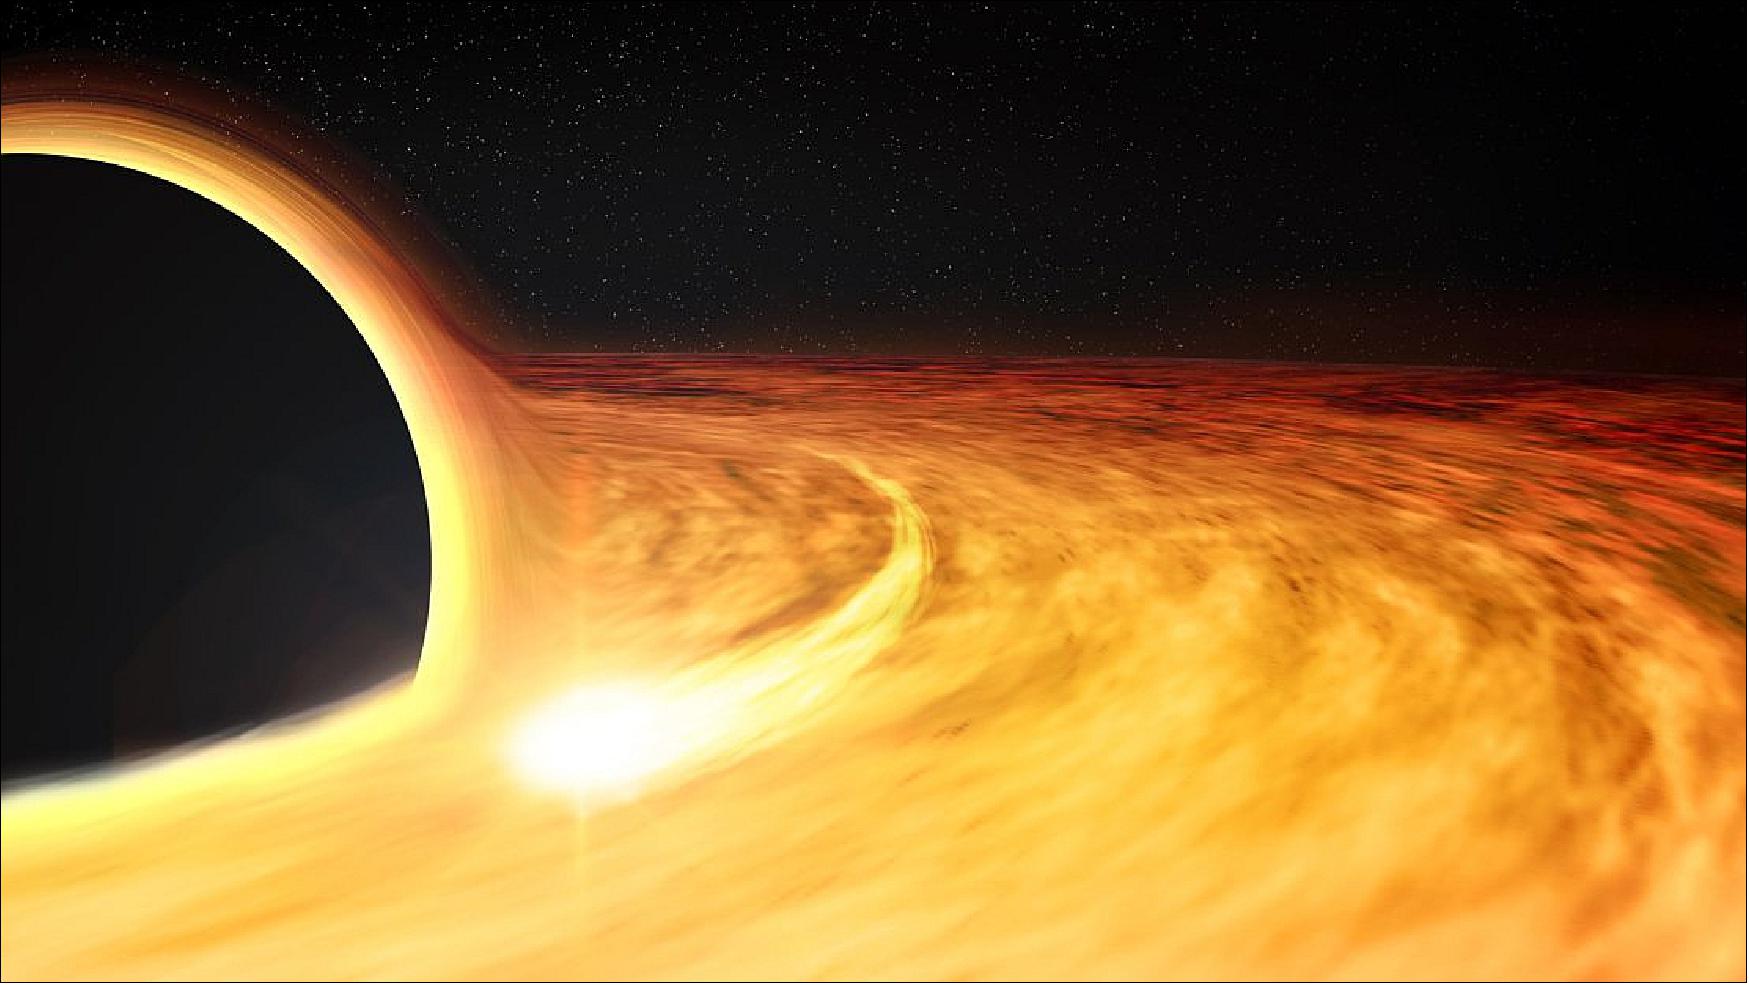 Figure 66: This artist's impression shows hot gas orbiting in a disc around a rapidly-spinning black hole. The elongated spot depicts an X-ray-bright region in the disc, which allows the spin of the black hole to be estimated. Studying the black hole devouring a star known as ASASSN-14li with ESA's XMM-Newton space observatory and NASA’s Chandra and Swift X-ray observatories, a team of astronomers has discovered an exceptionally bright and stable signal that allowed them to determine the black hole’s spin rate (image credit: NASA/CXC/M. Weiss)